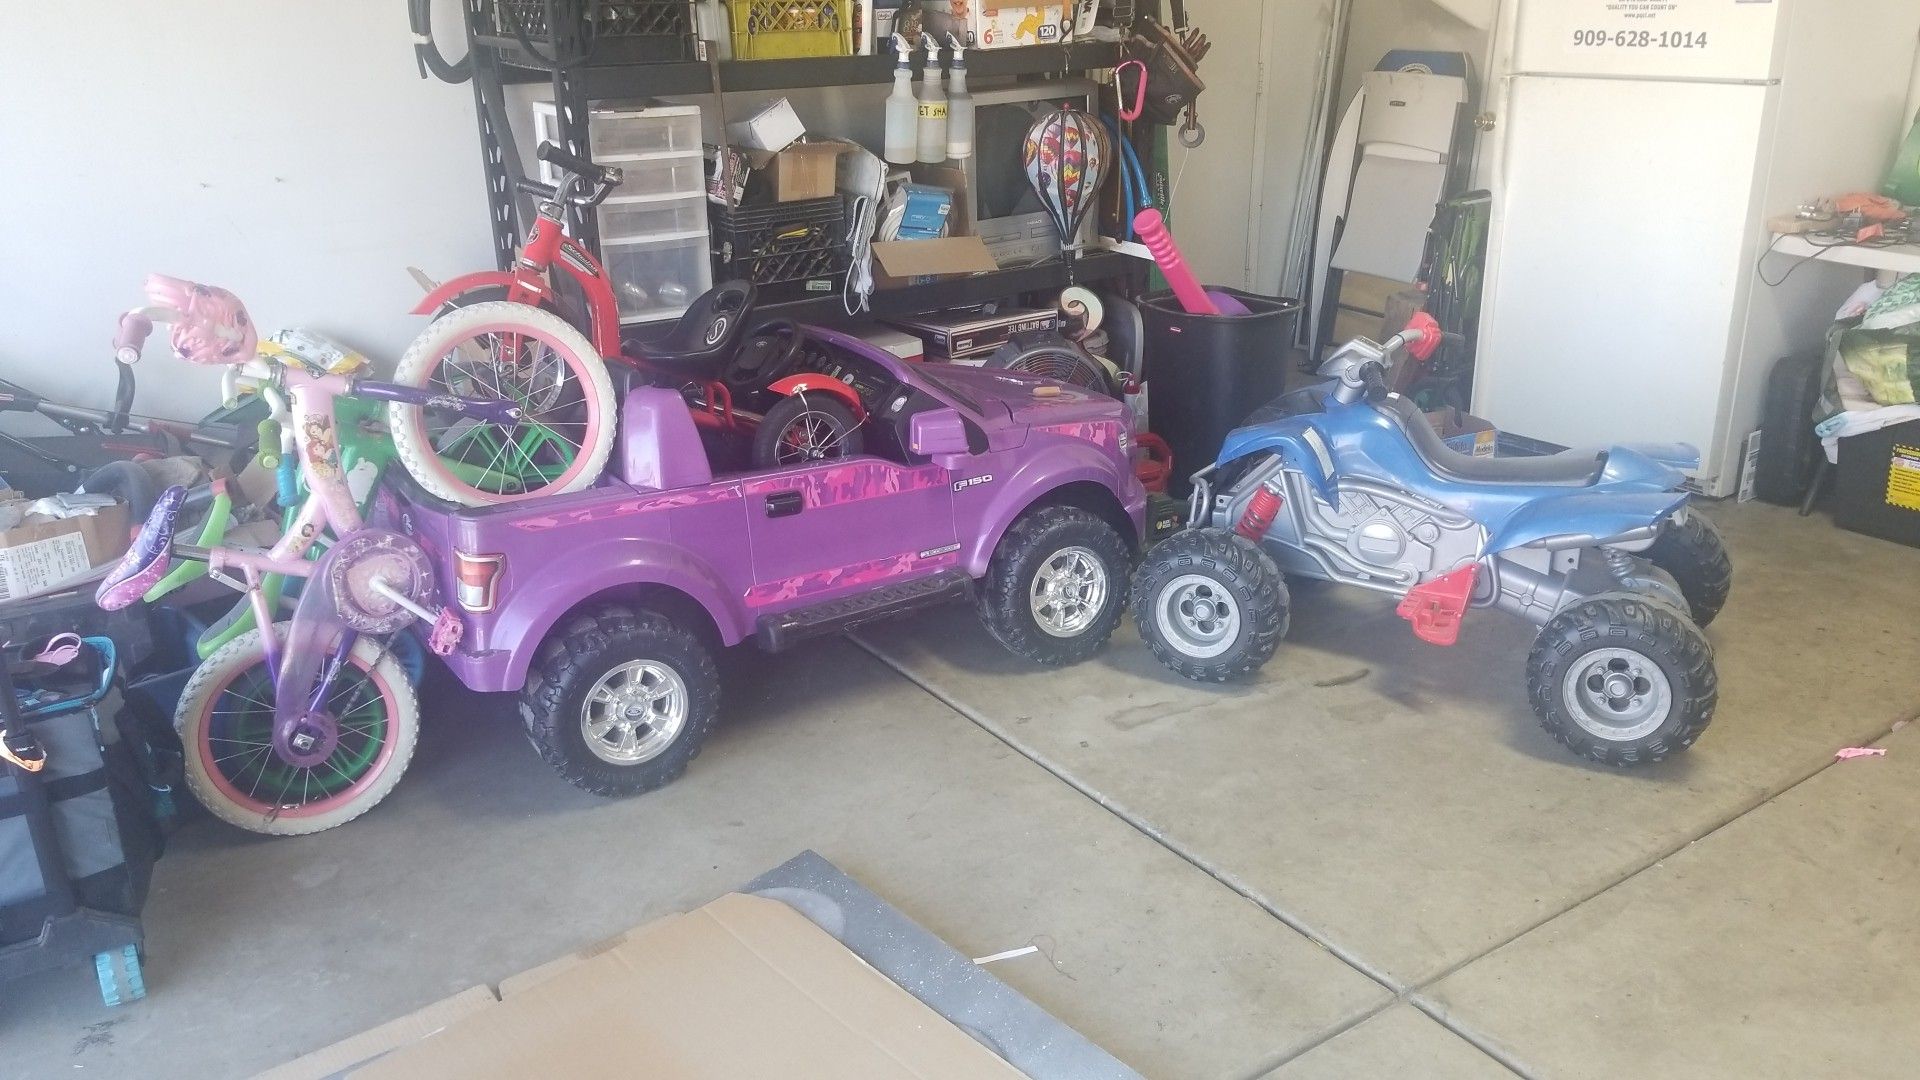 Need g1 today make offer! Powerwheels,bikes,air hockey table, dvd players, full bed and frame. Send text come check out.Fontana {contact info removed}